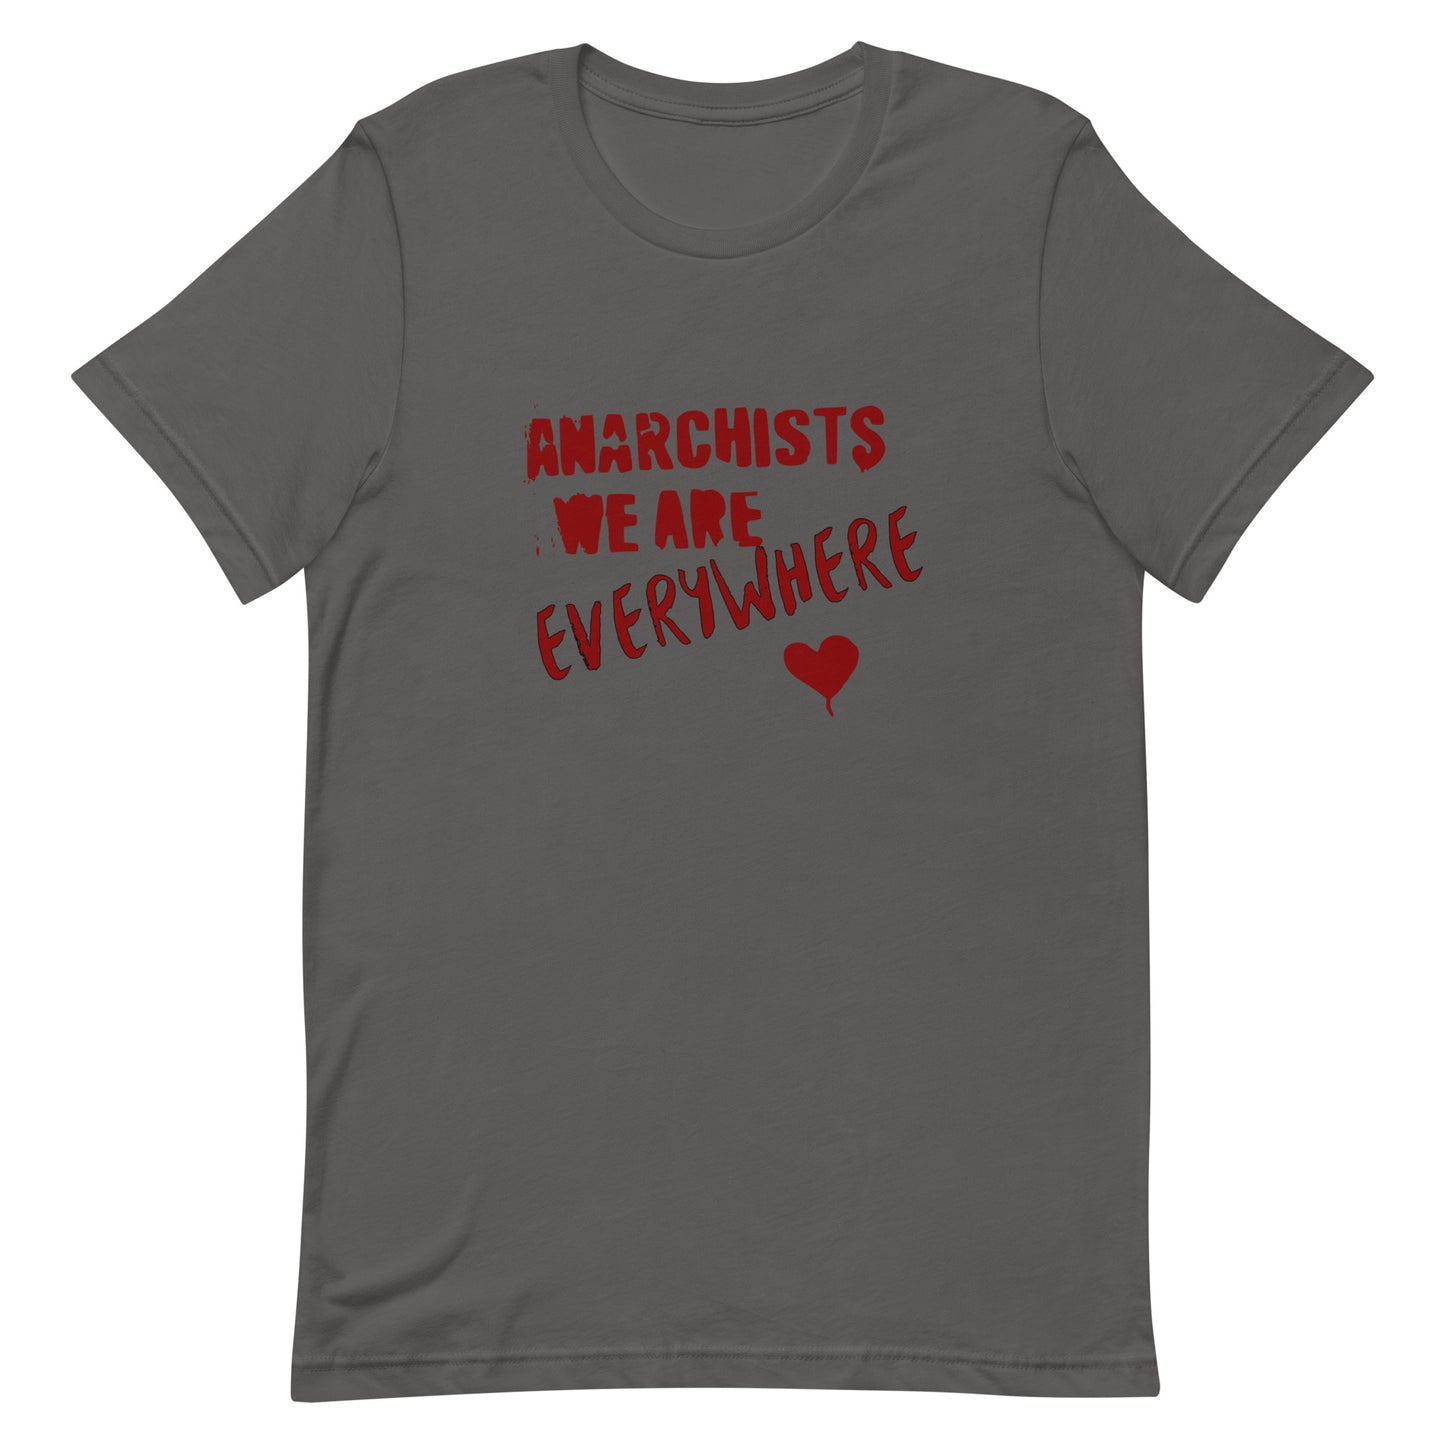 Anarchy Wear "We Are Every Where" Red Unisex t-shirt